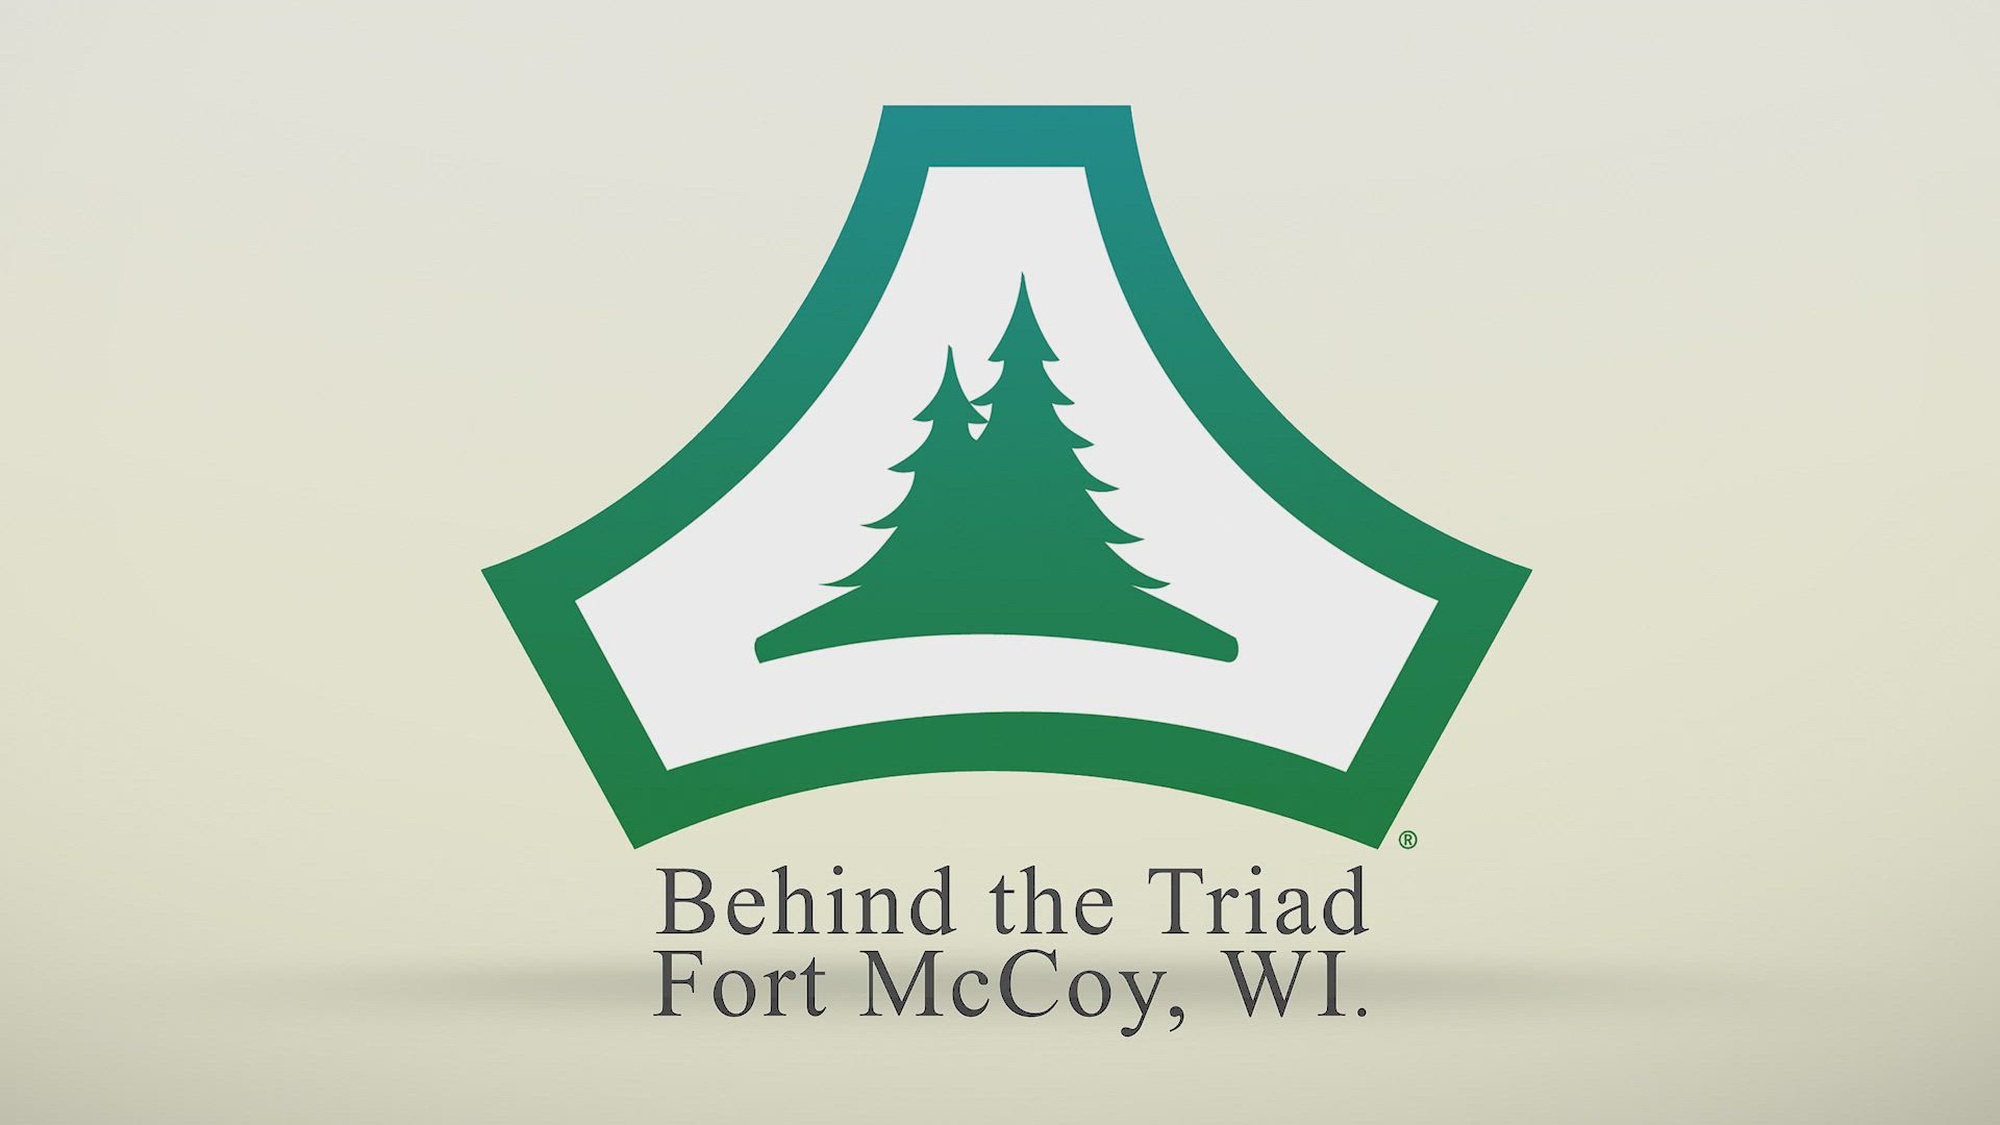 In the second episode of Behind the Triad, Fort McCoy Garrison Commander Colonel Stephen Messenger meets with veterans touring the Fort McCoy Commemorative Area, History Center and Equipment Park. He interviews a few veterans who actually served here at Fort McCoy in the 50s, 60s and 70s.
(U.S. Army video by Greg Mason, Fort McCoy MVI)